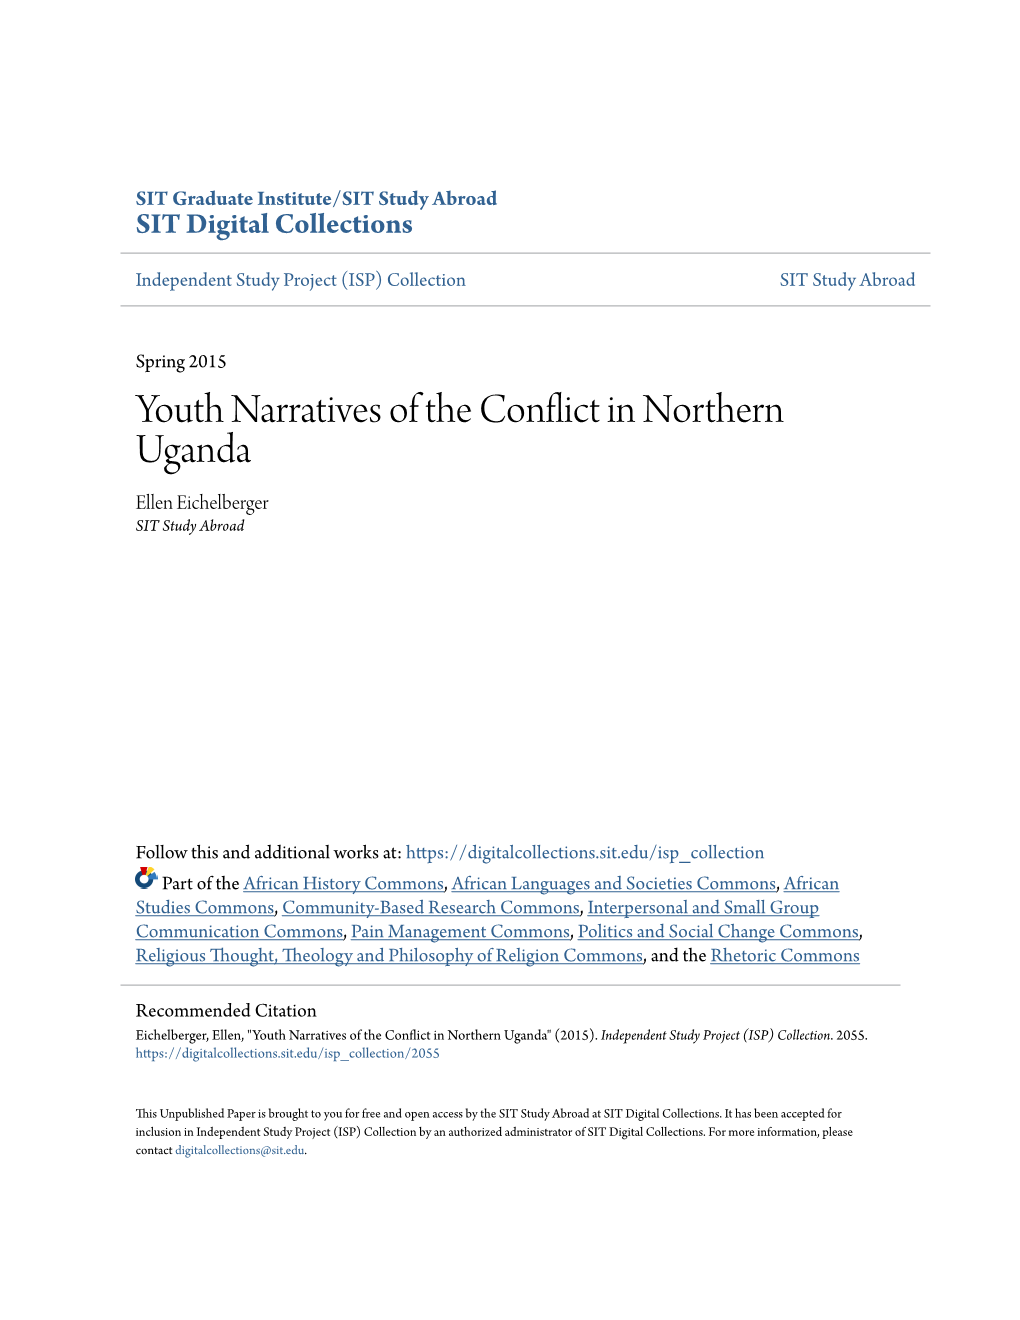 Youth Narratives of the Conflict in Northern Uganda Ellen Eichelberger SIT Study Abroad